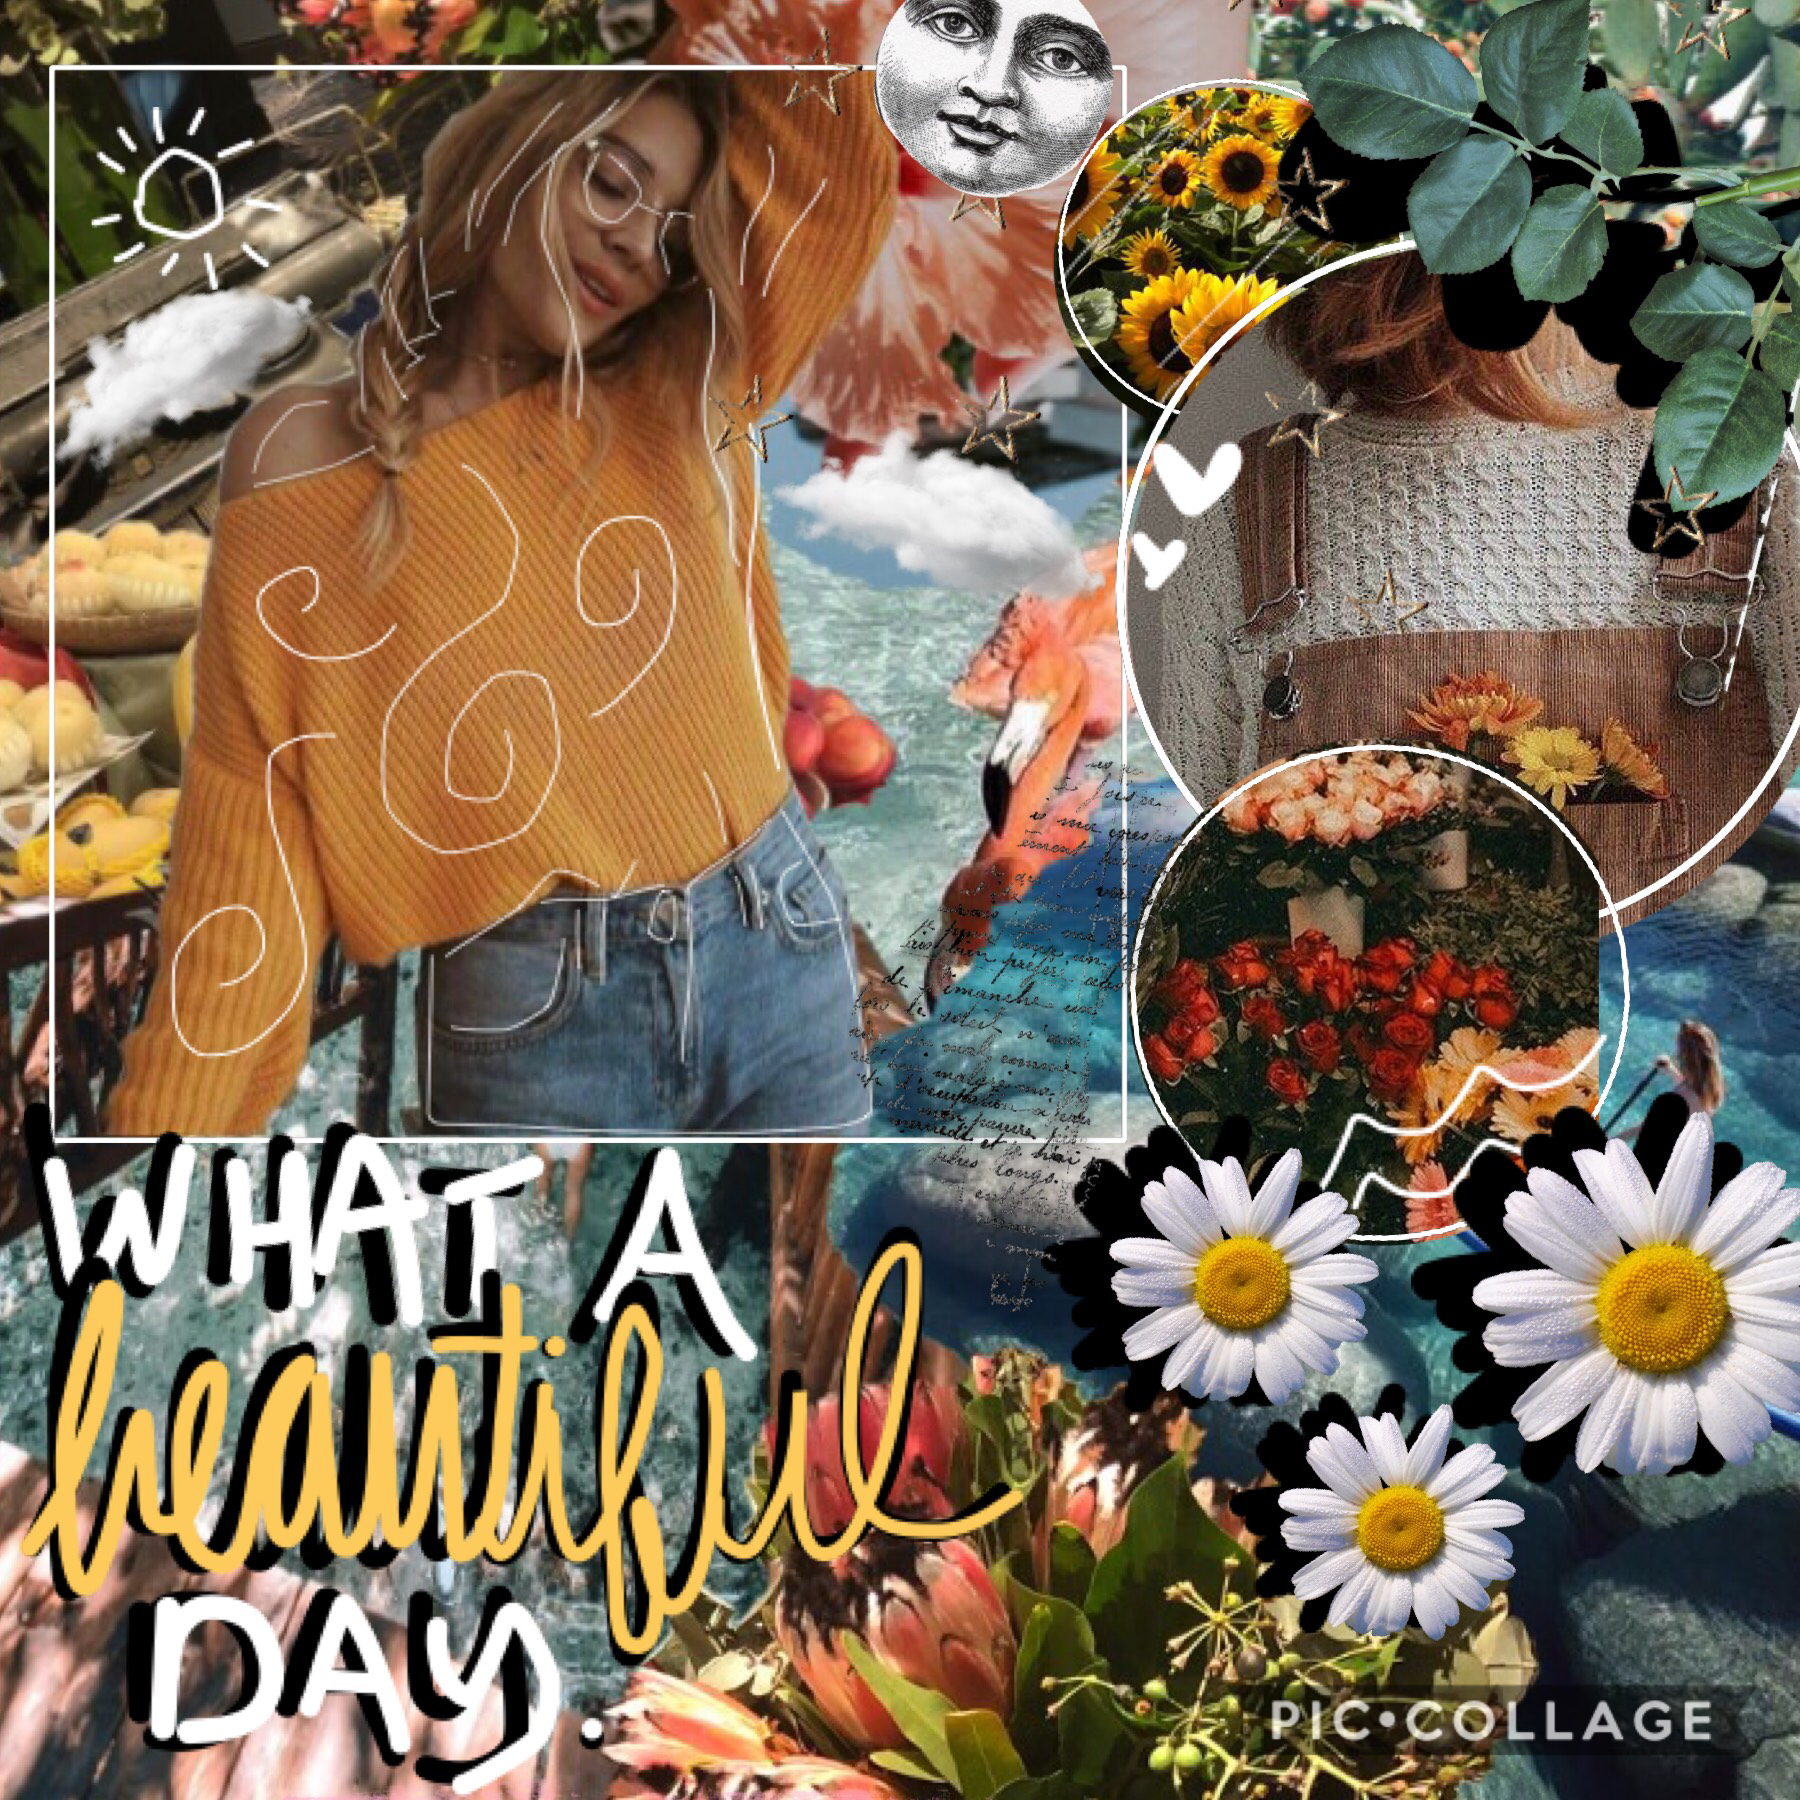 🌻tap🌻

...and what a bad collage 😂

ITS THE LAST DAY OF SUMMEr AND I AM SAD

